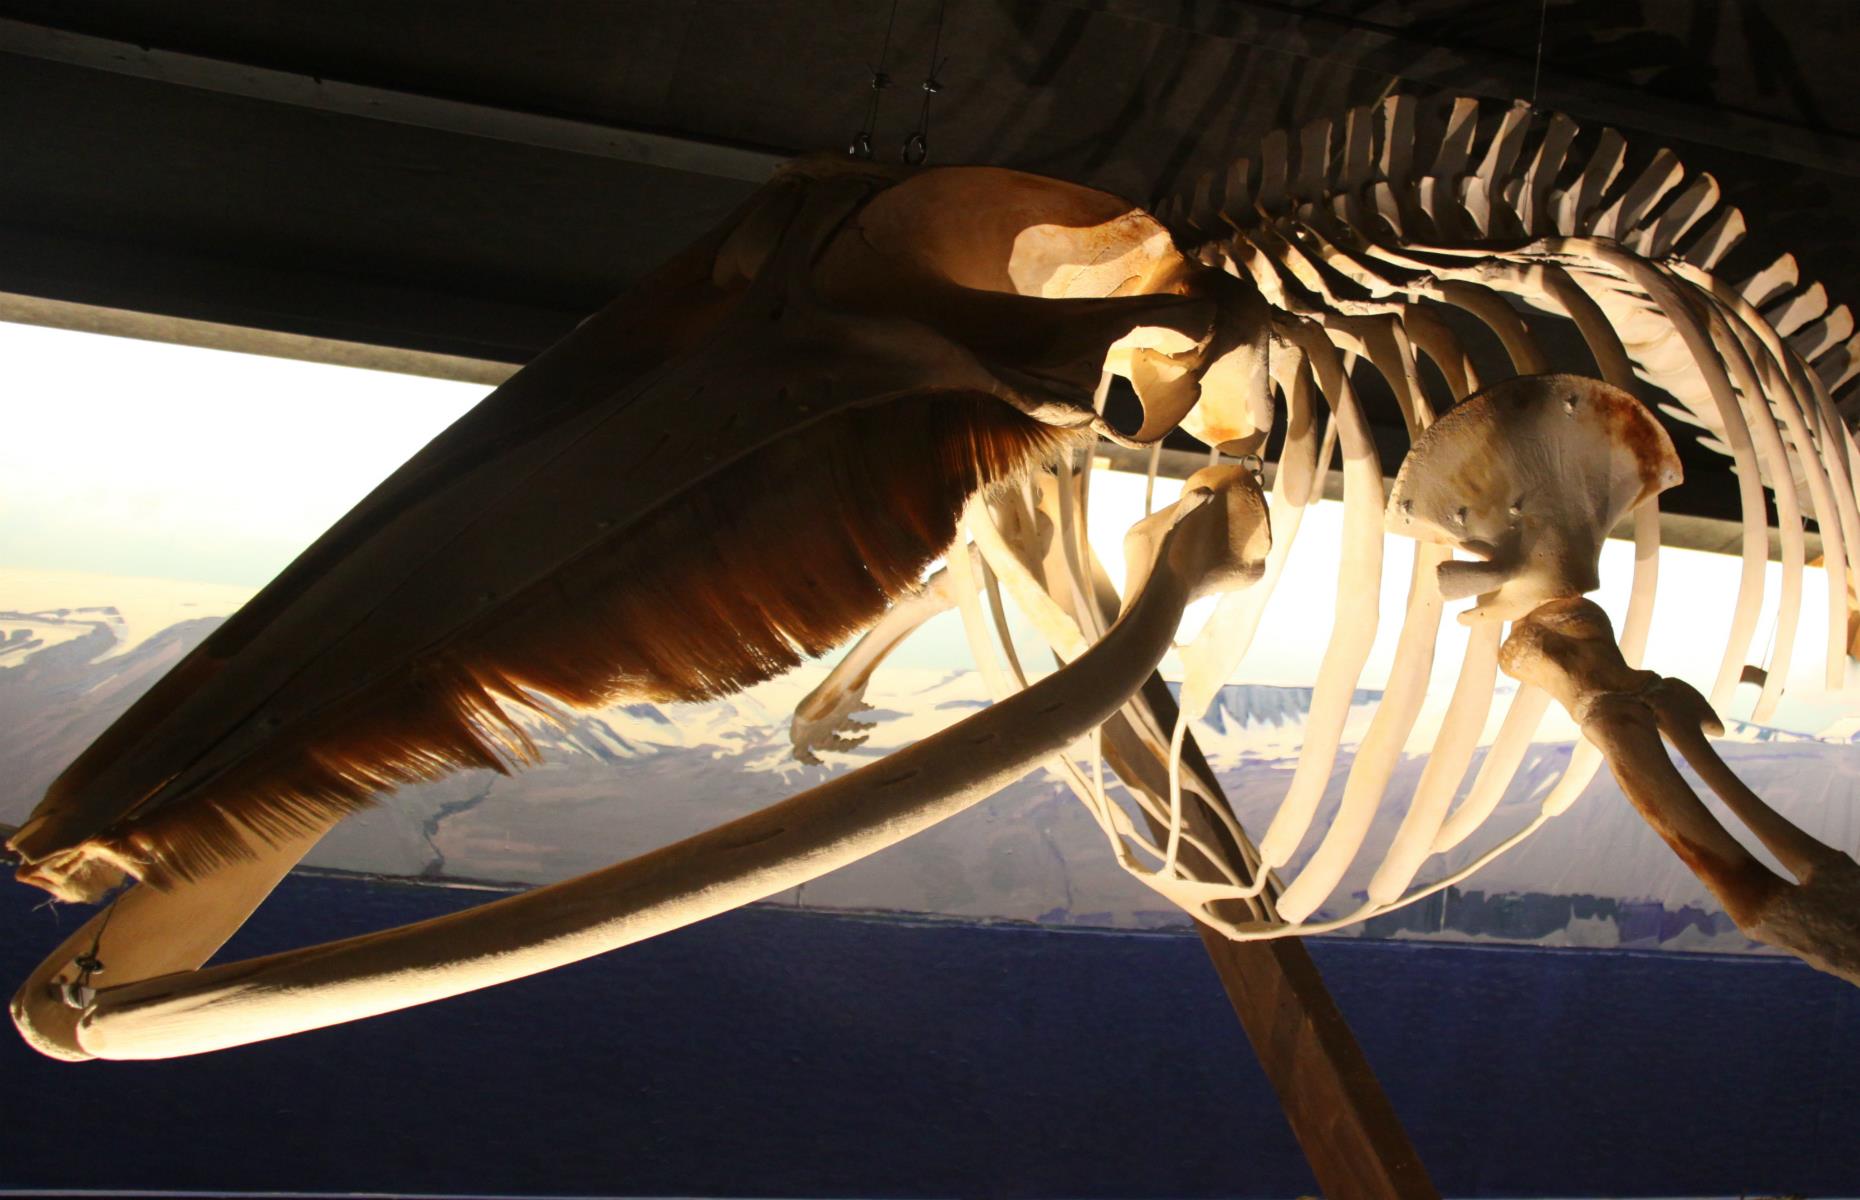 <p>It's all about the whales in this part of the country, so while you're here take time to visit the Whale Museum. It's a small but fascinating exhibition with the skeletons of 10 different species of whales that inhabit the waters around Húsavík.</p>  <p>The highlight is the Narwhal specimen with its unicorn-like horn protruding from its skull. The museum is dedicated to the preservation of whales, and has even received a UN award for environmental tourism.</p>